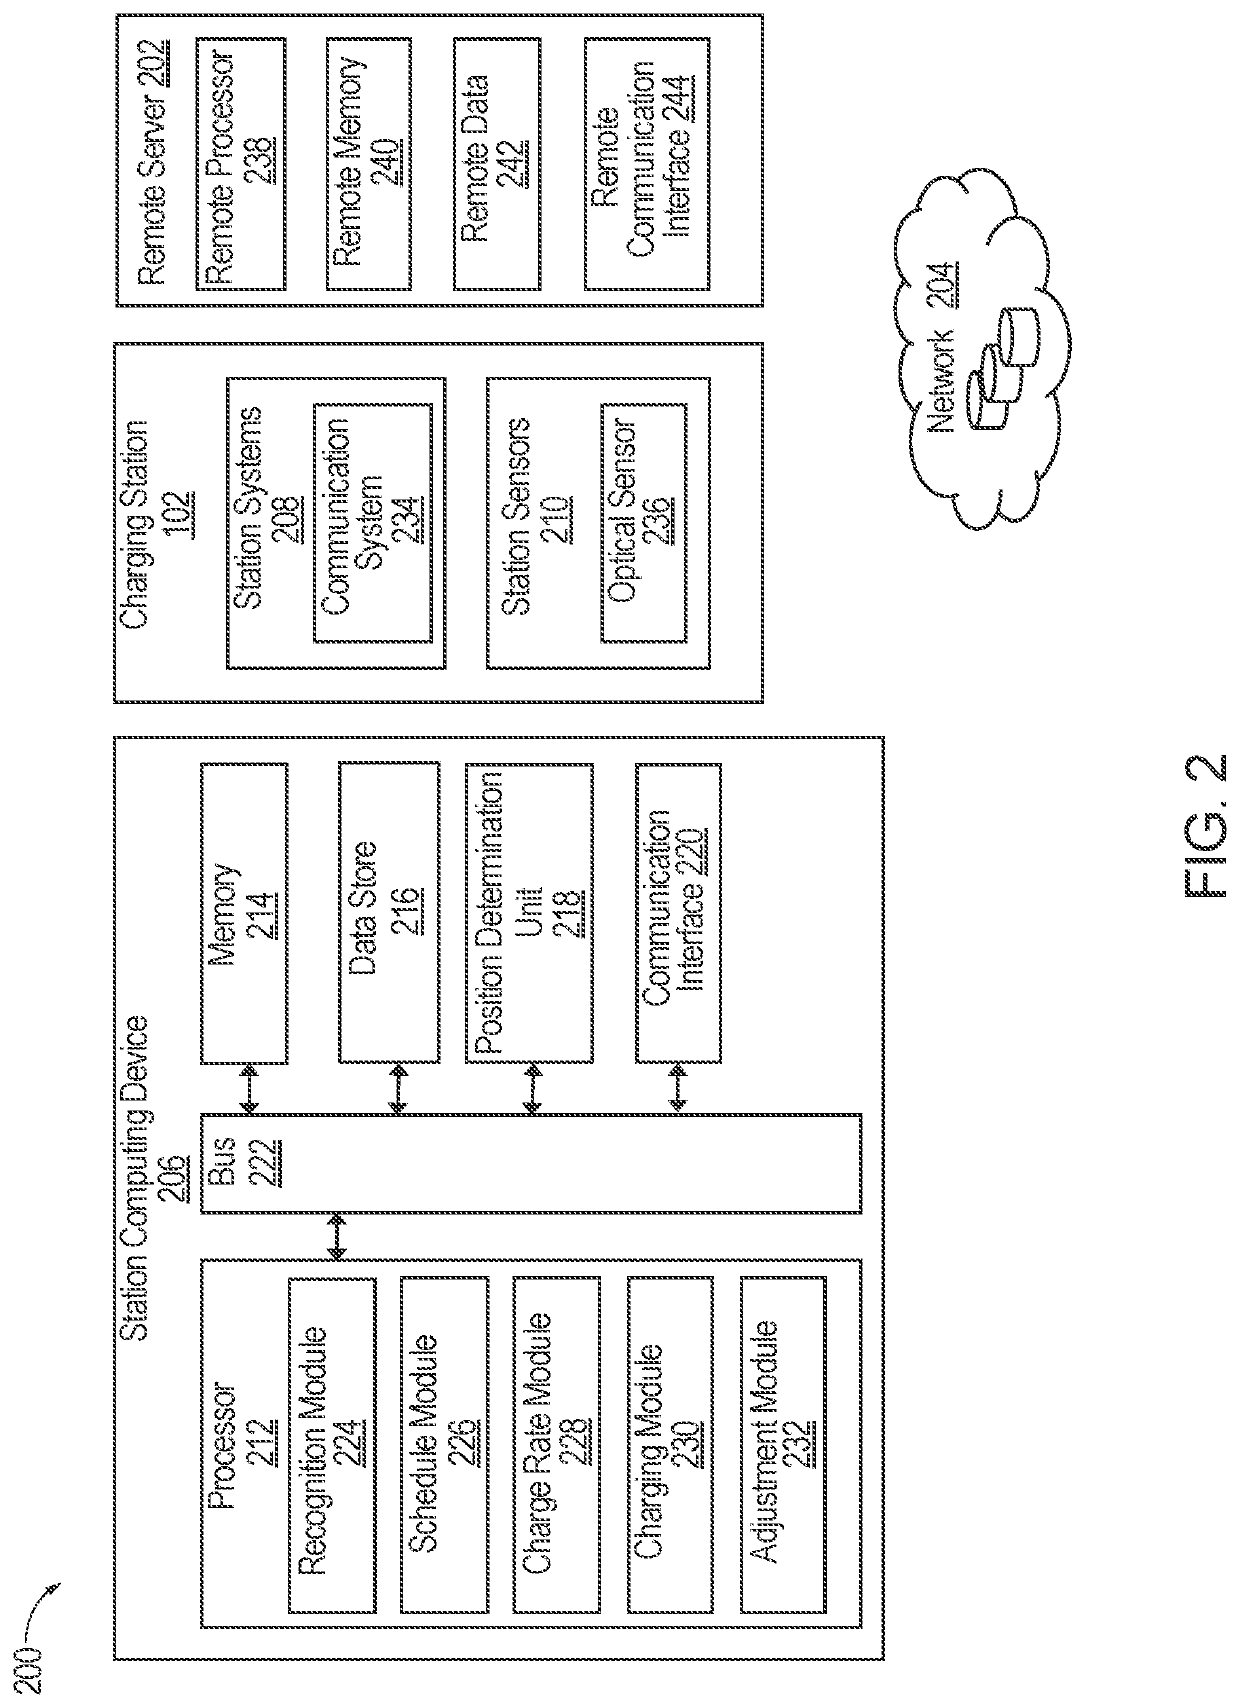 Systems and methods for providing a personalized charging rate